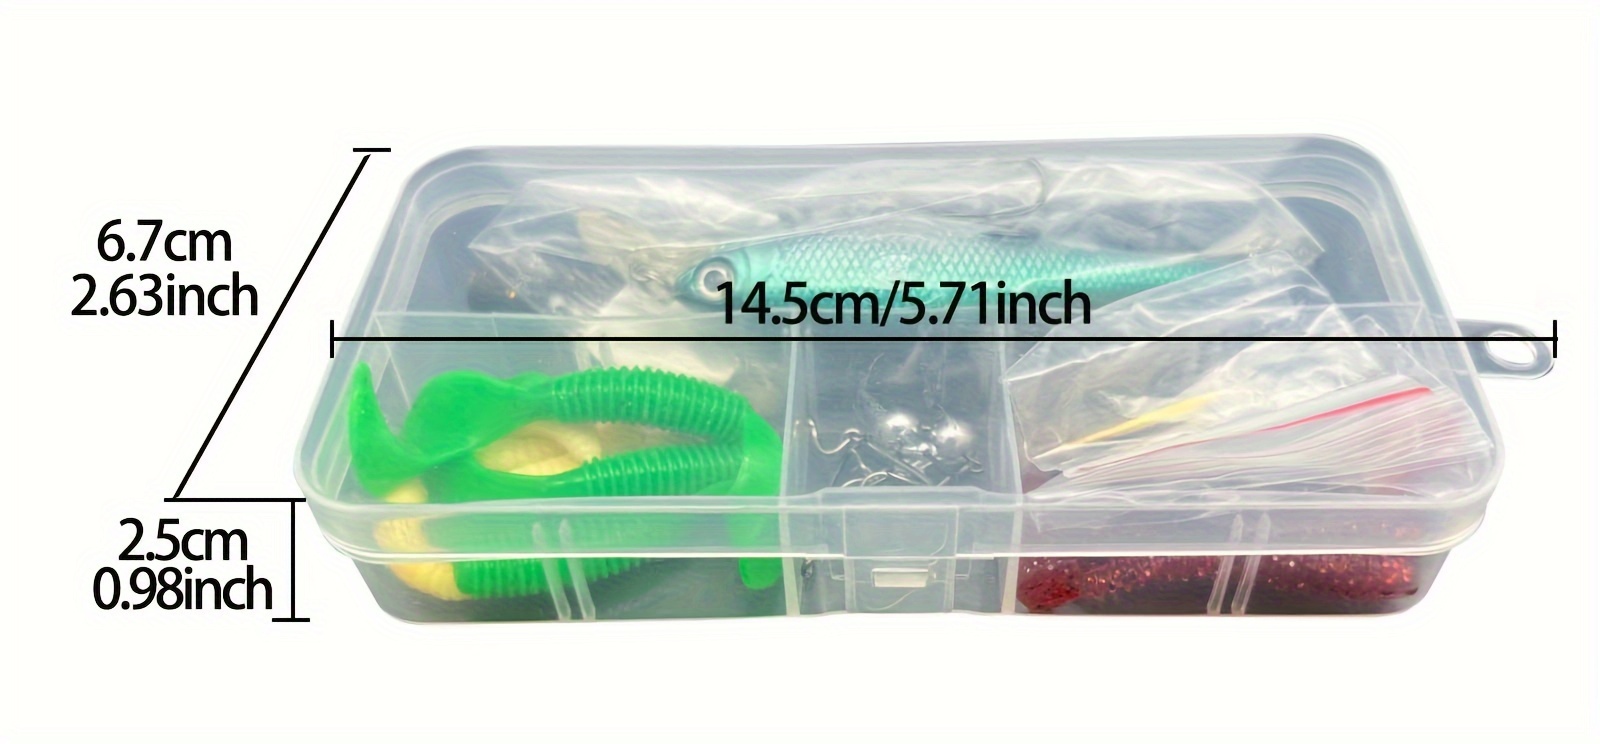  Sinrier Fishing Lures Kit for Freshwater Bait Tackle Kit for  Fly Fishing Wet Flies Bass Trout Salmon Fishing Accessories Tackle Tool Box  Including Spoon Lures Soft Plastic Worms Crankbait (82